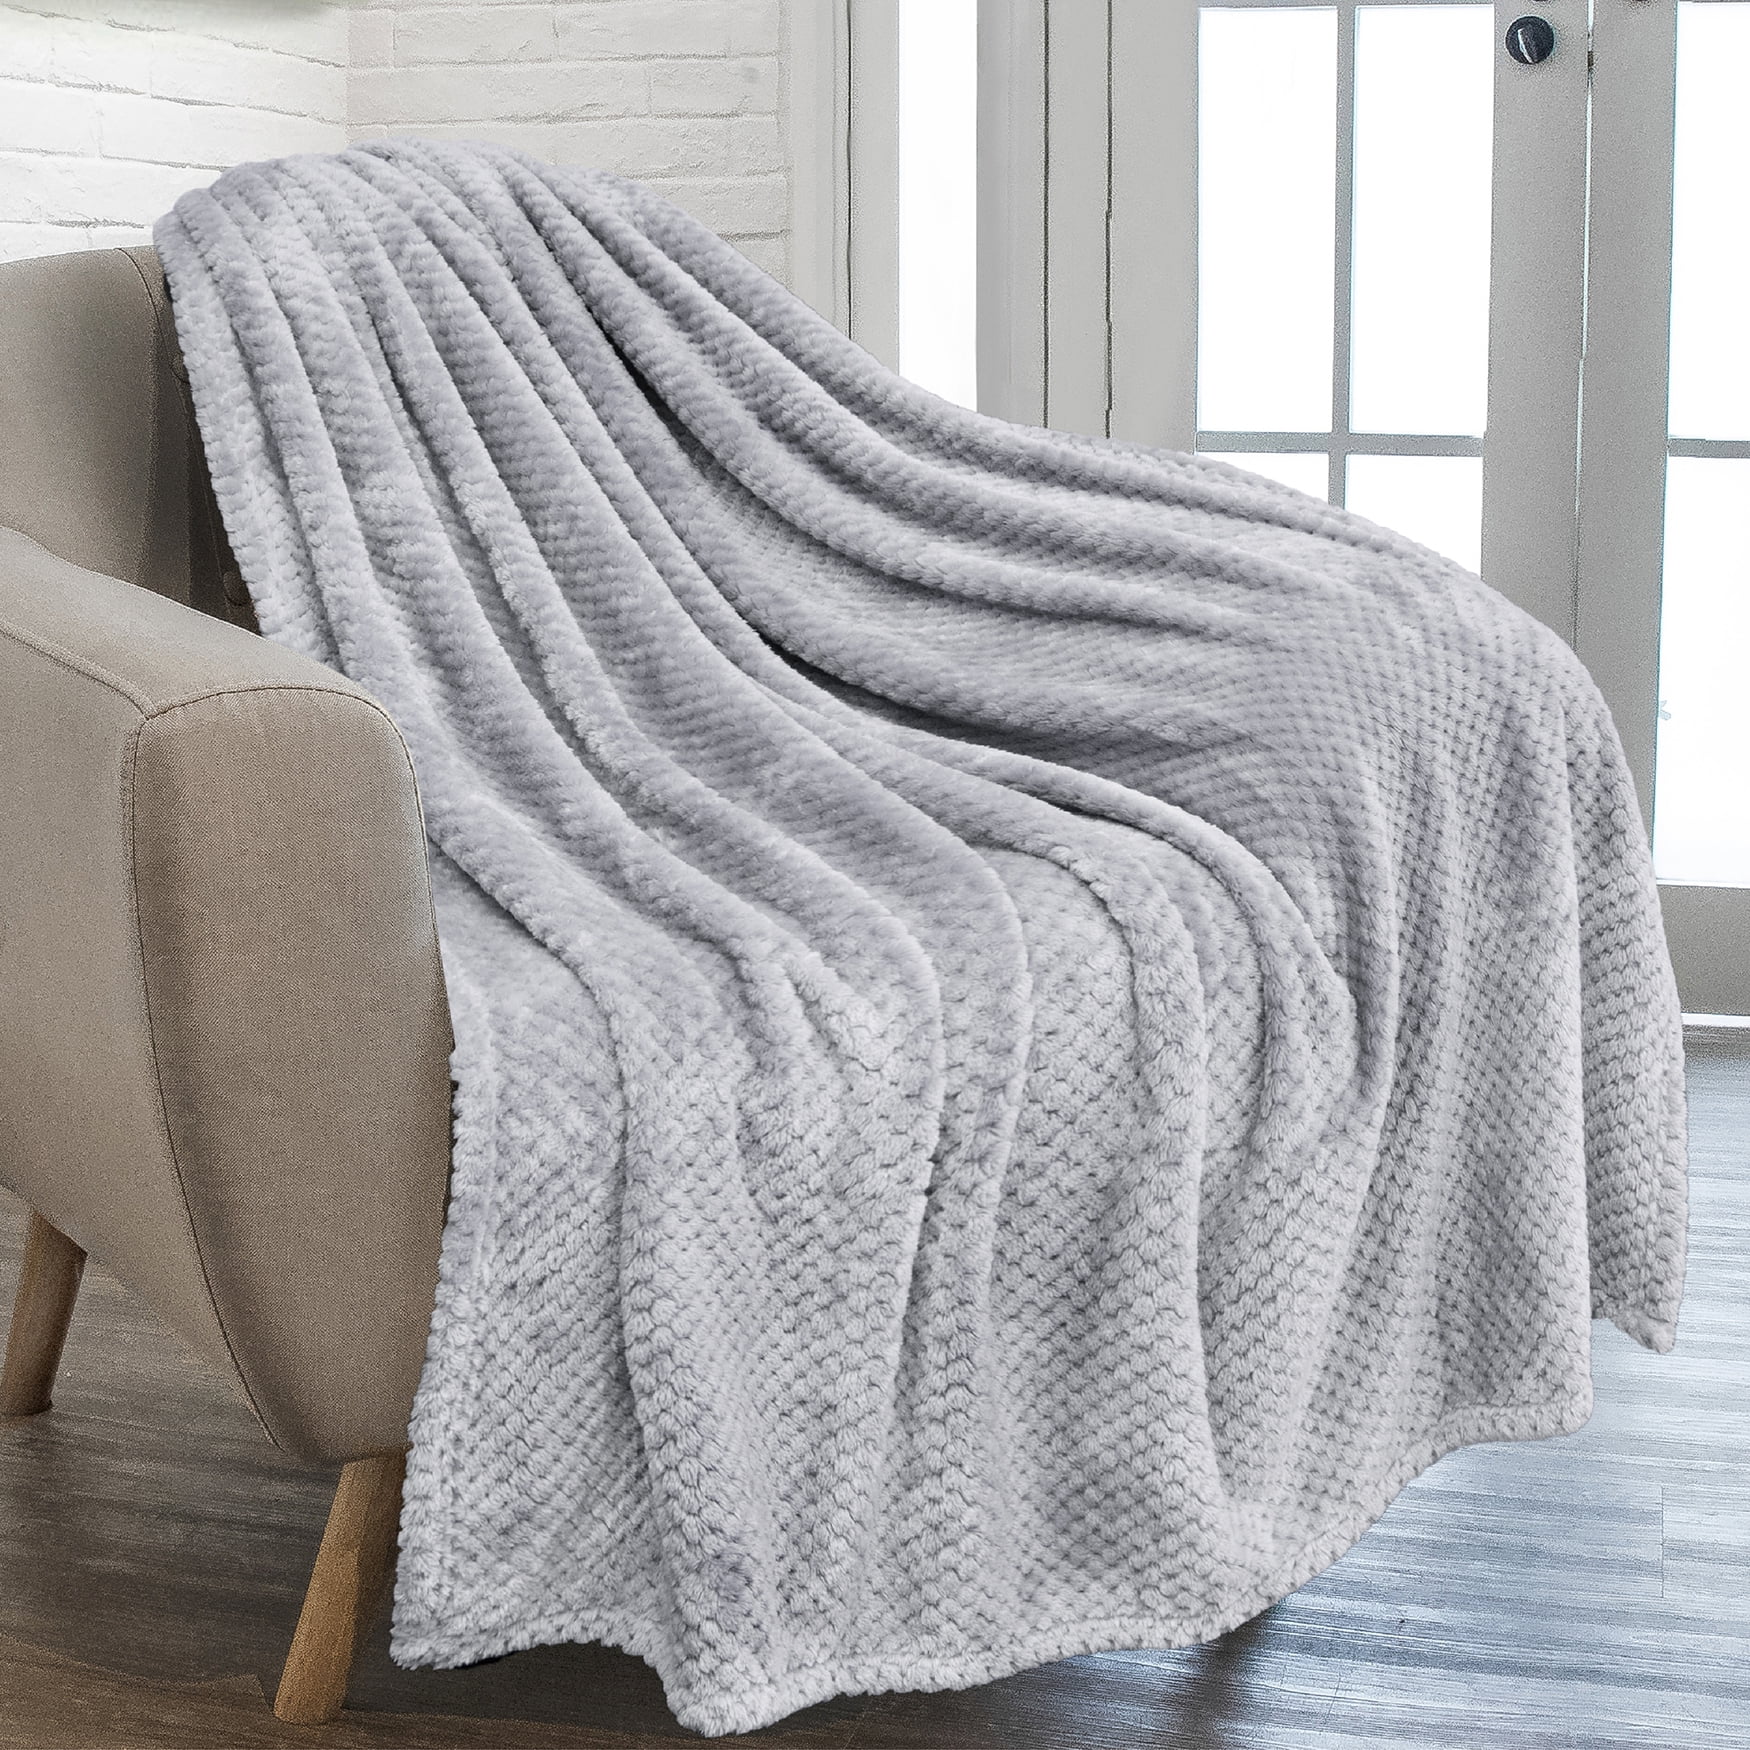 Knitted Woven Blanket for Ladies Pink Fringed Decorative Blanket 50x60 Inches Men and Children Texture Blanket for Sofa Bed Sofa Travel NC Knitted Blanket